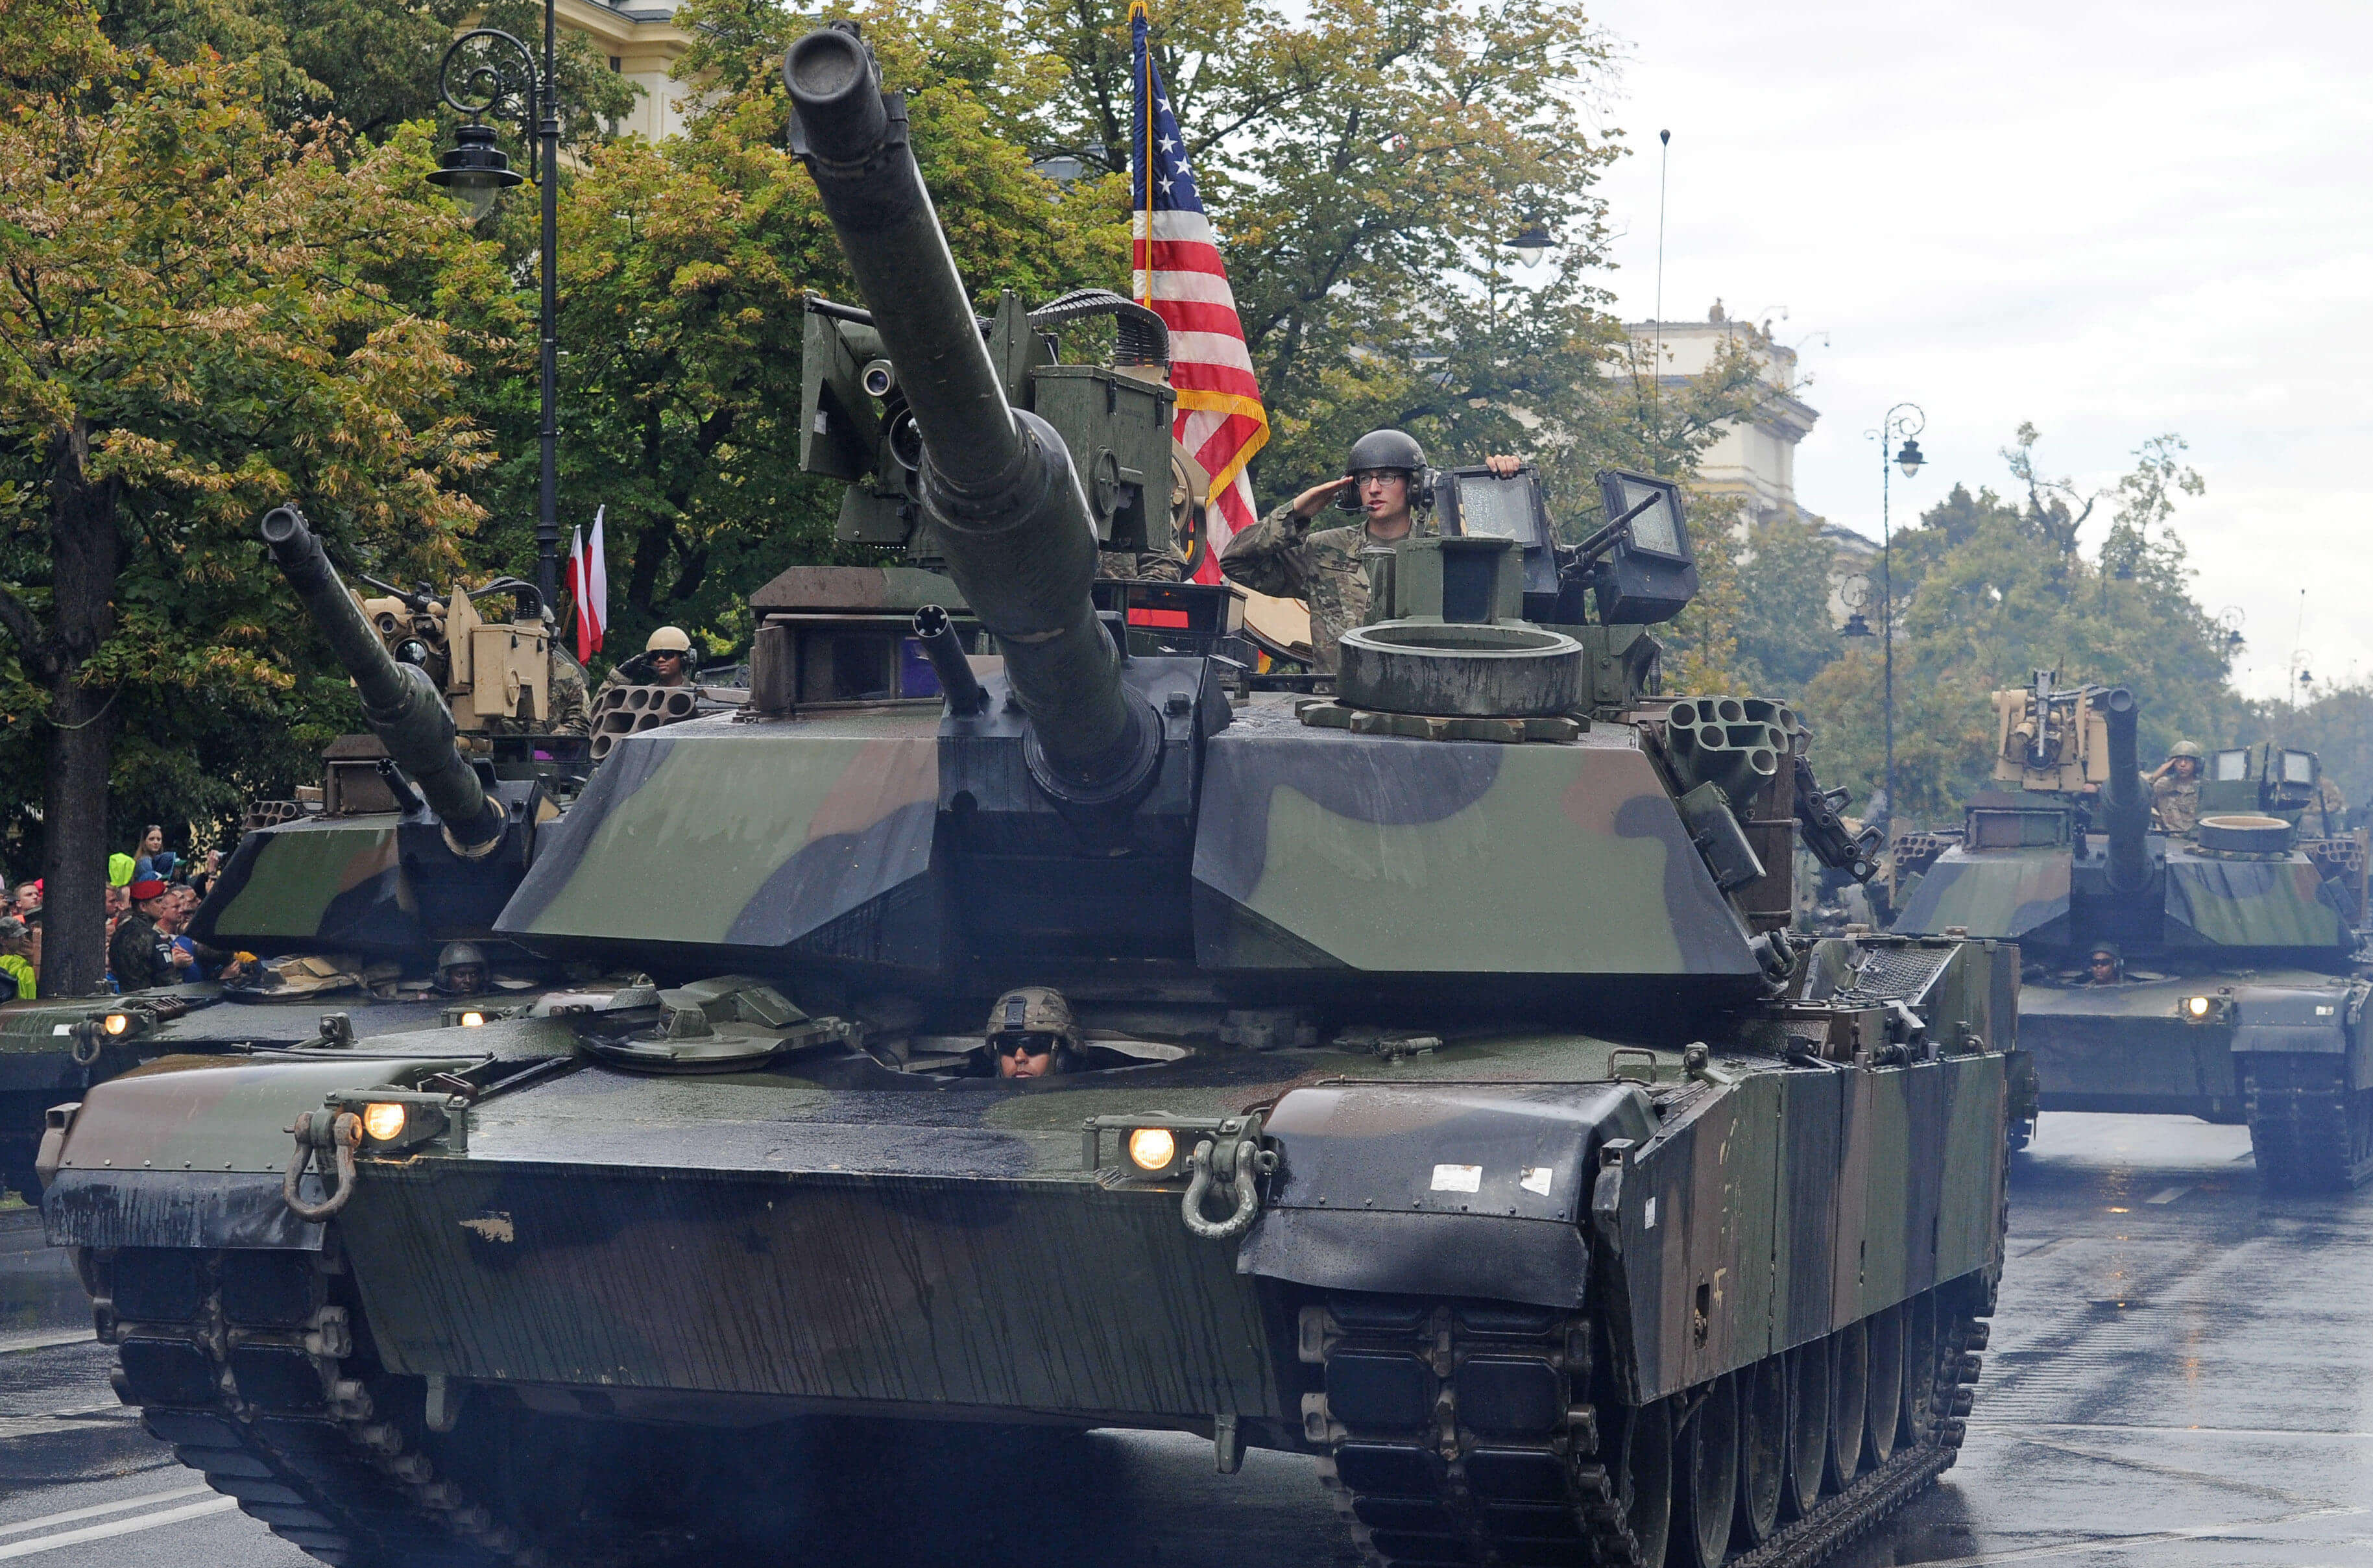 US tanks join Polish parade in show of military presence | Boston Herald